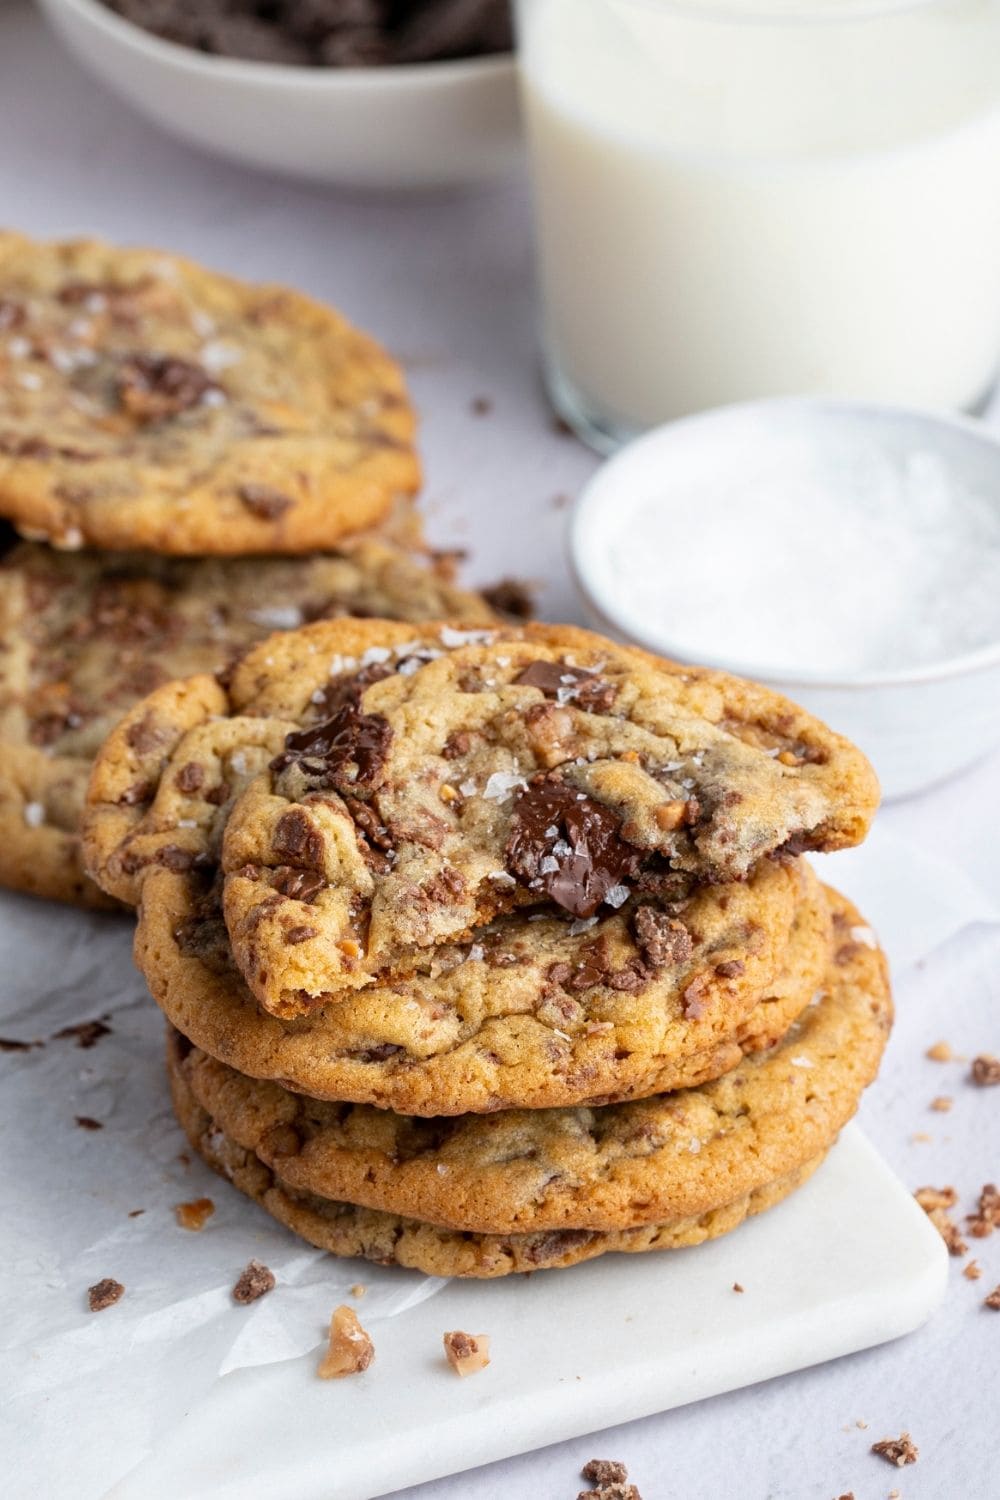 Heath Bar Cookies and a glass of milk